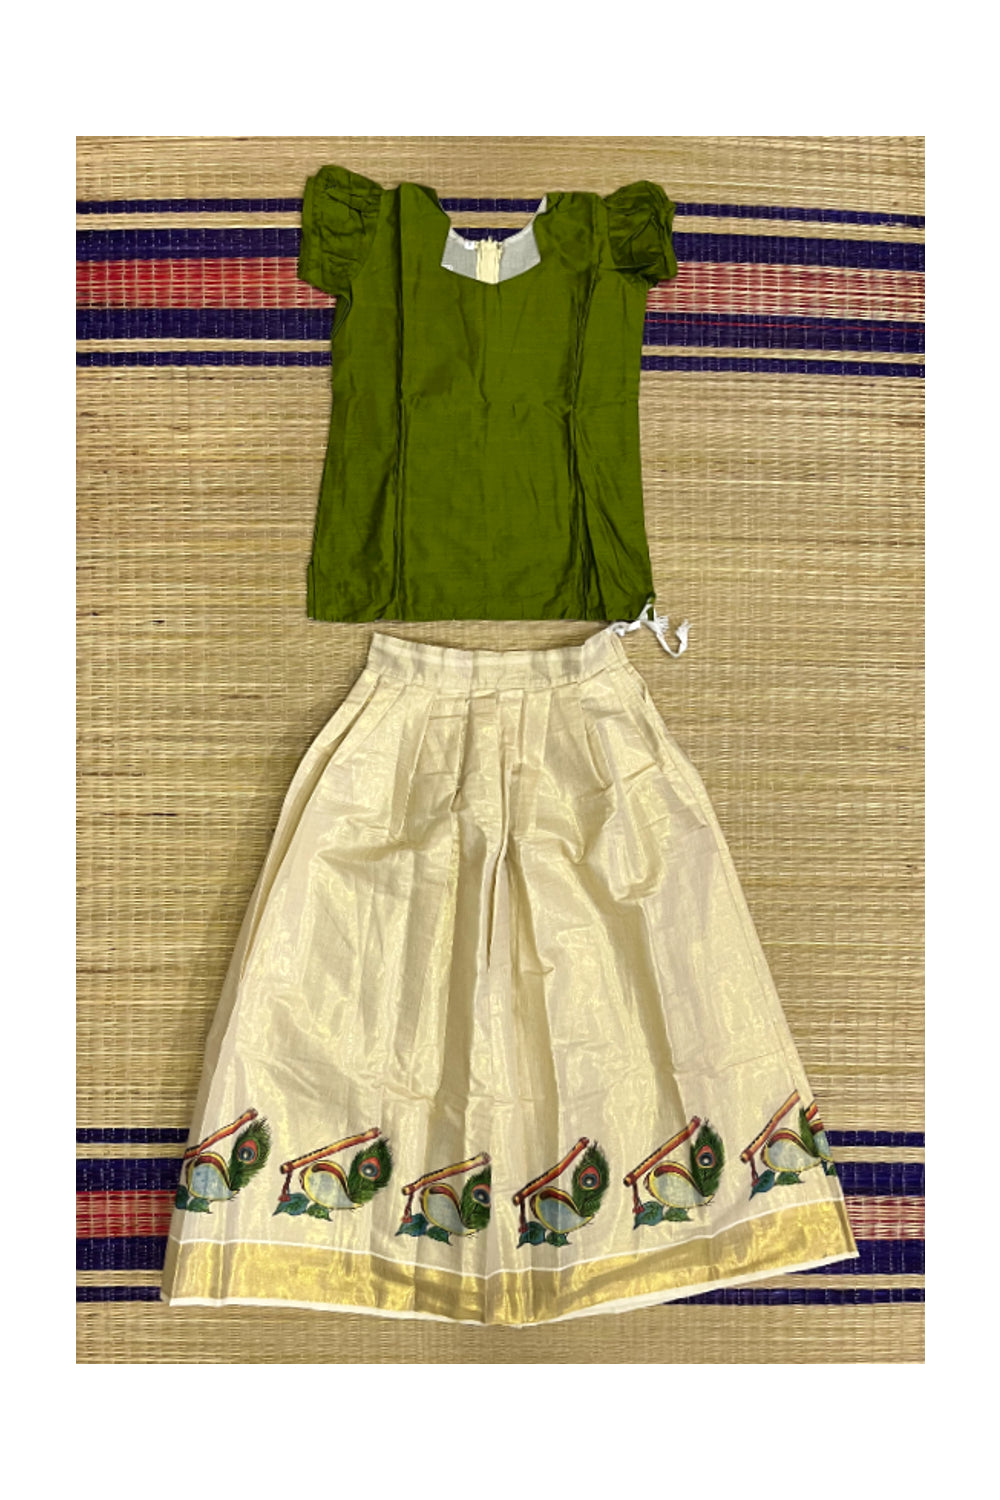 Southloom Kerala Pavada Blouse with Feather and Flute Mural Design (Age - 9 Year)